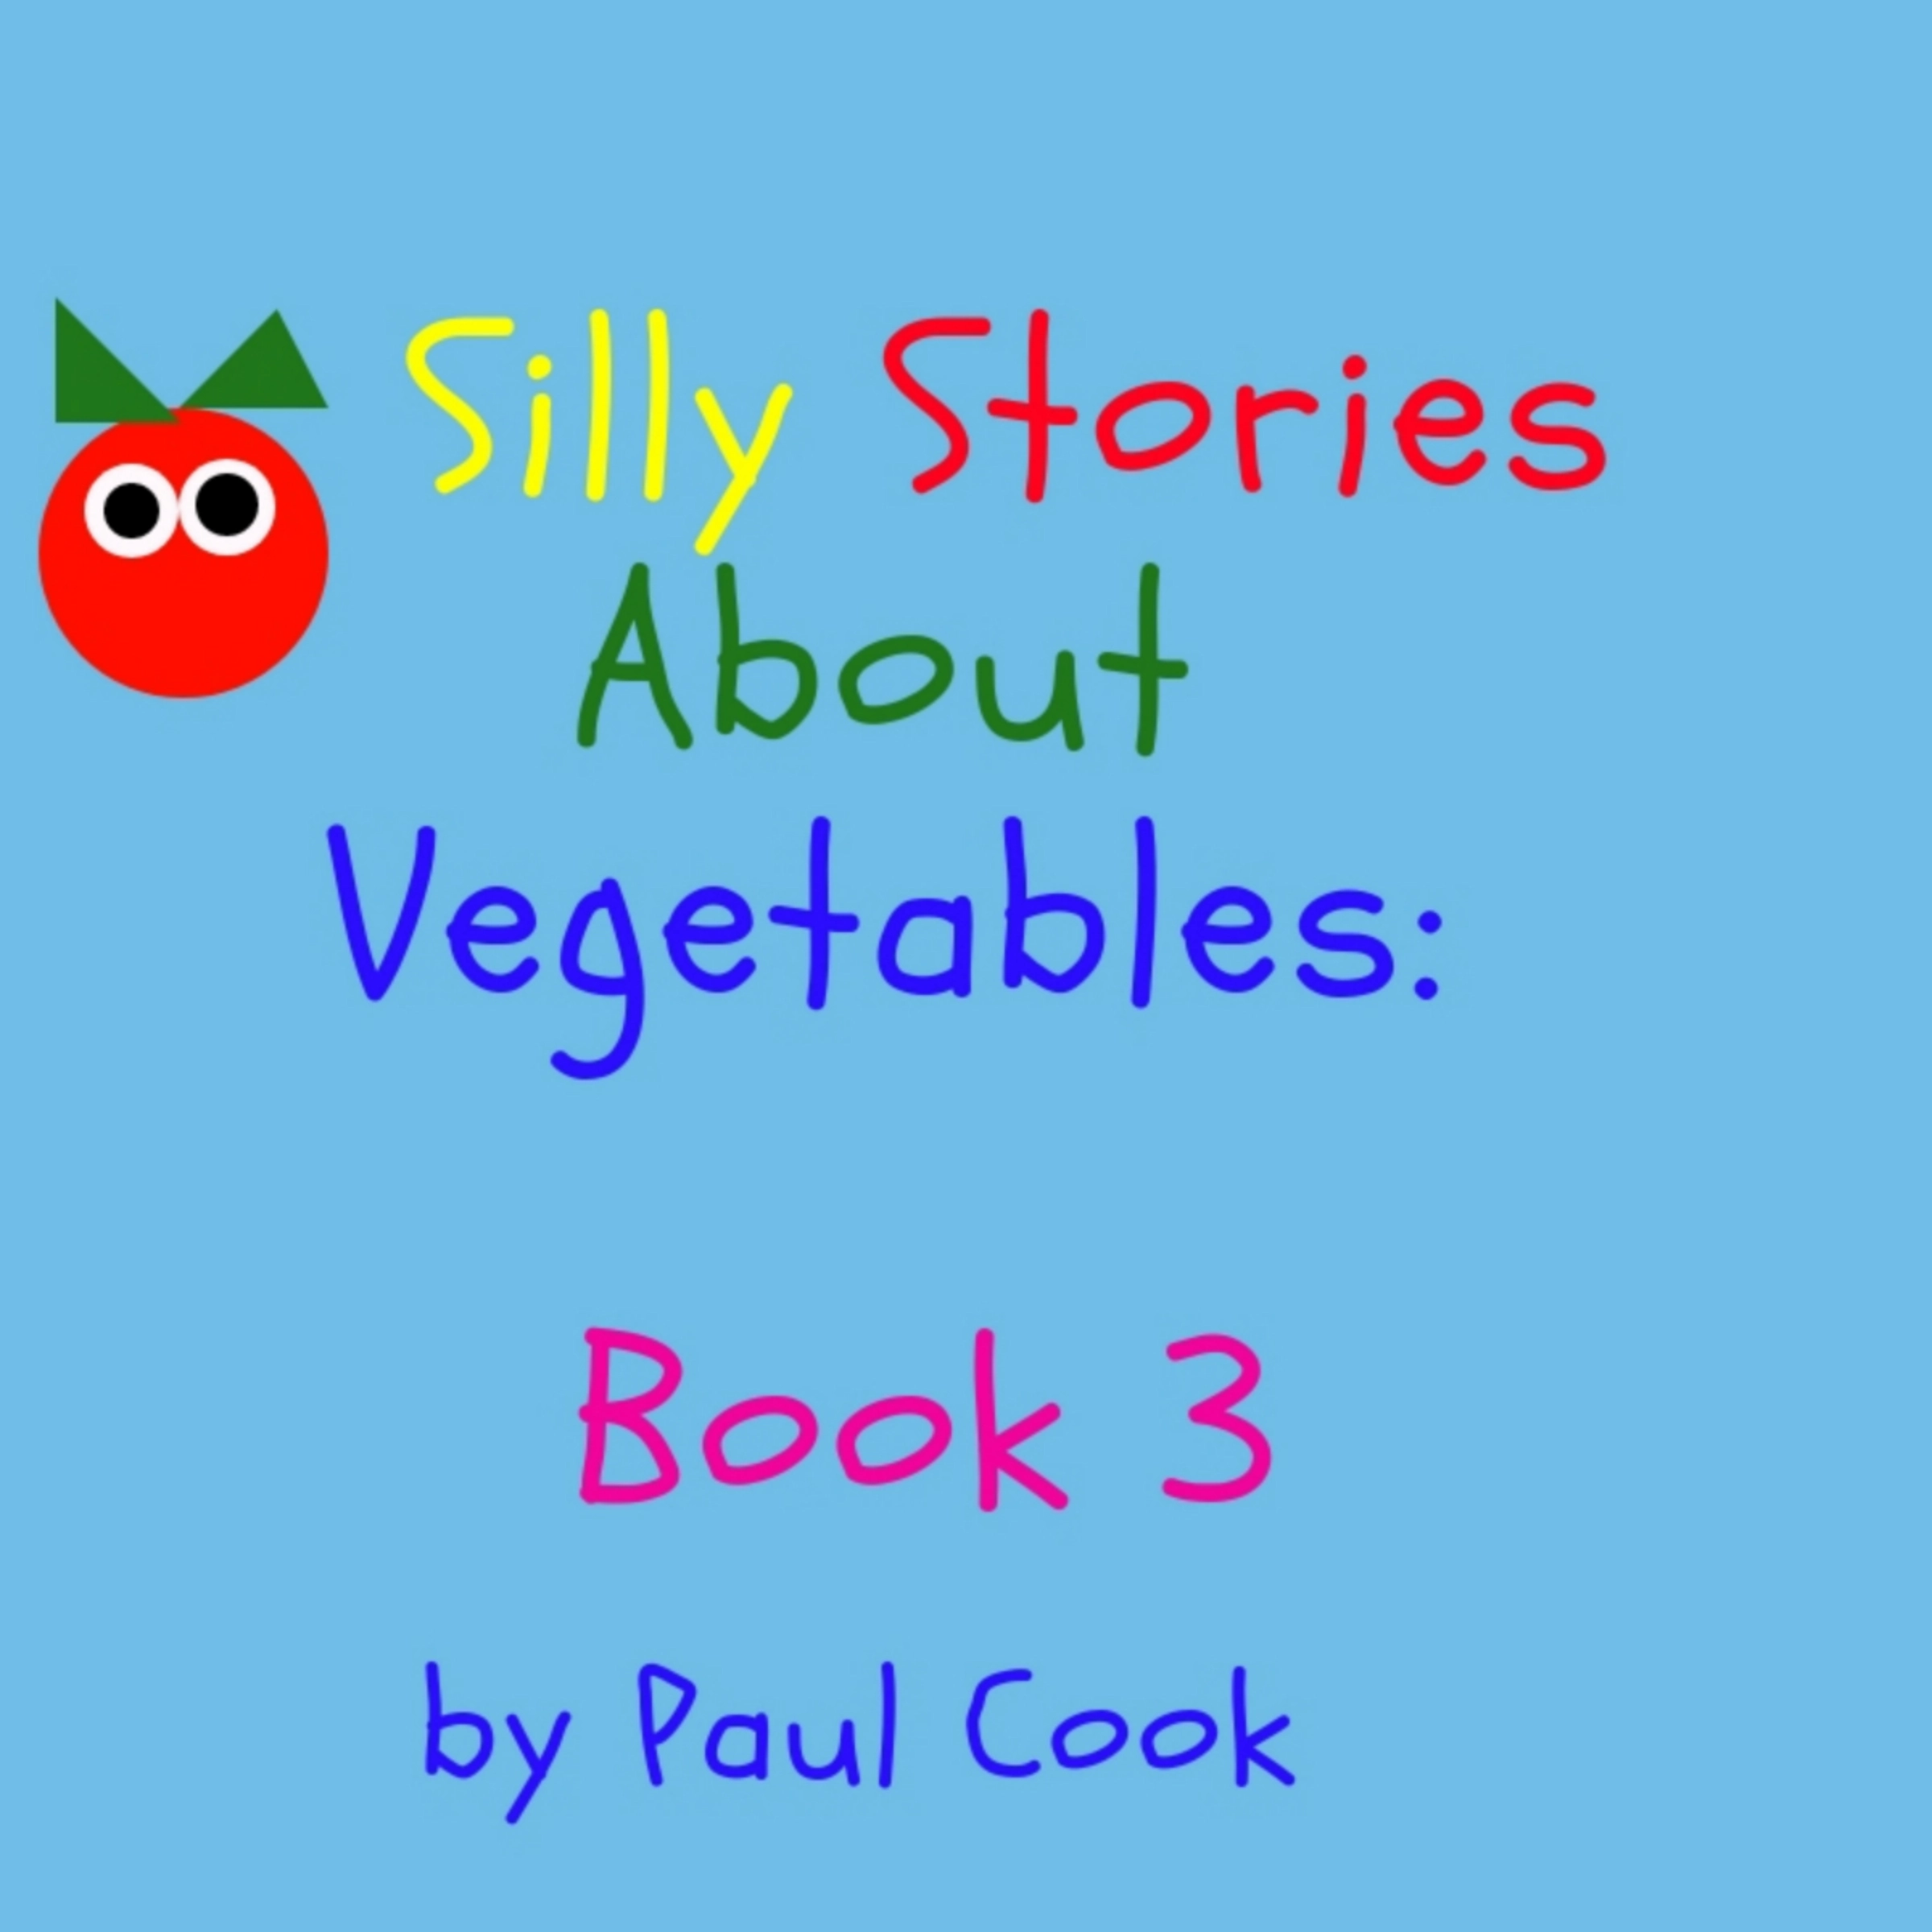 Silly Stories About Vegetables Book 3 Audiobook by Paul Cook